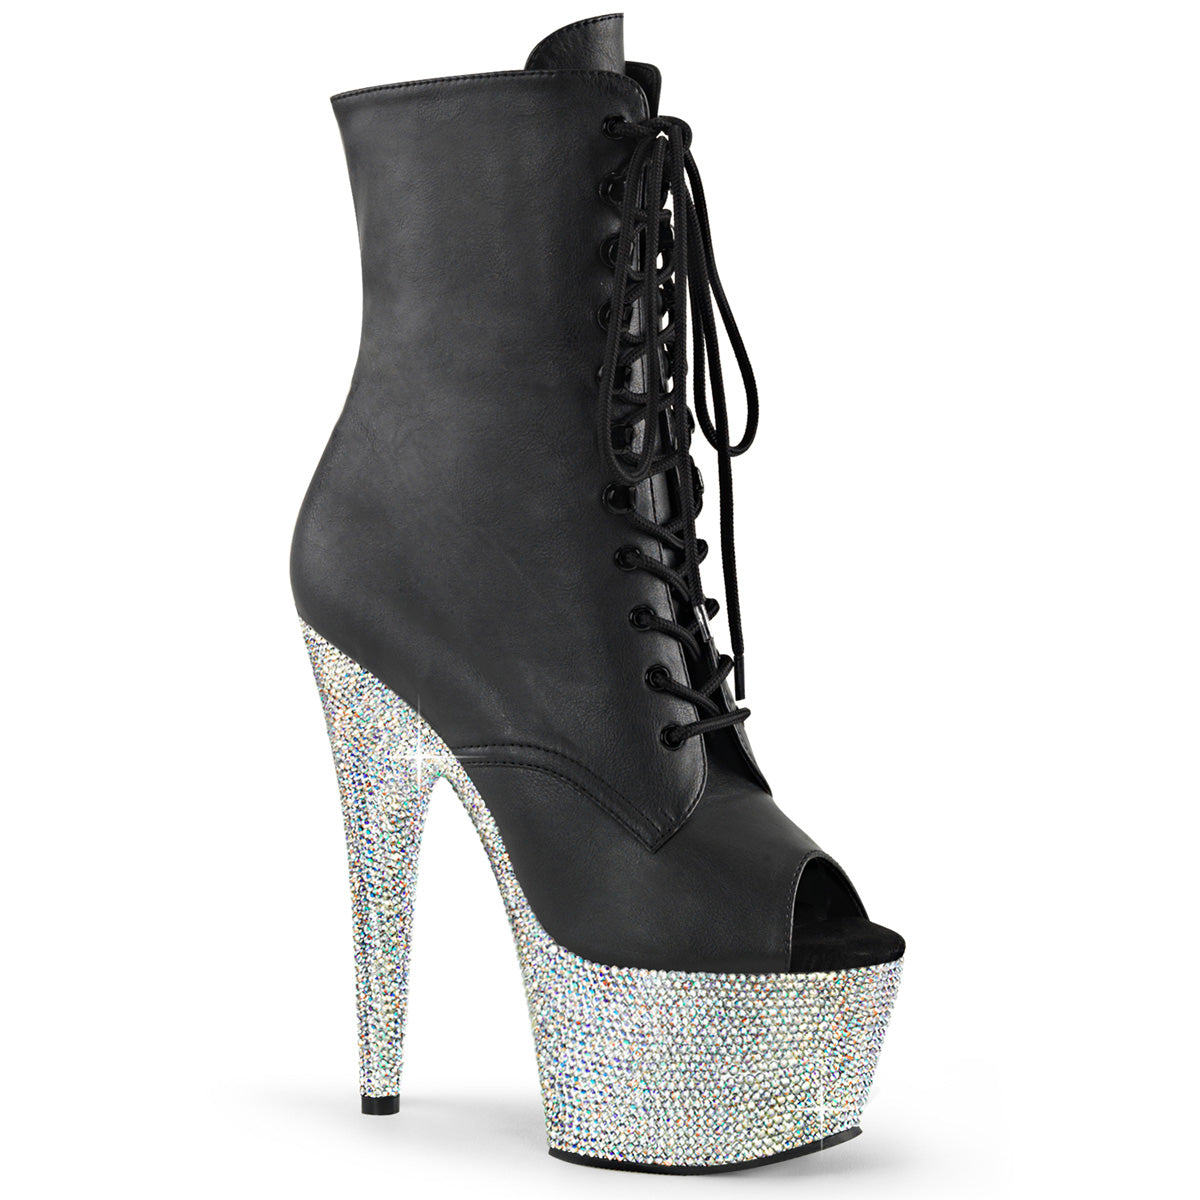 BEJEWELED-1021-7 Black & Silver Calf High Peep Toe Boots Black & Silver Multi view 1